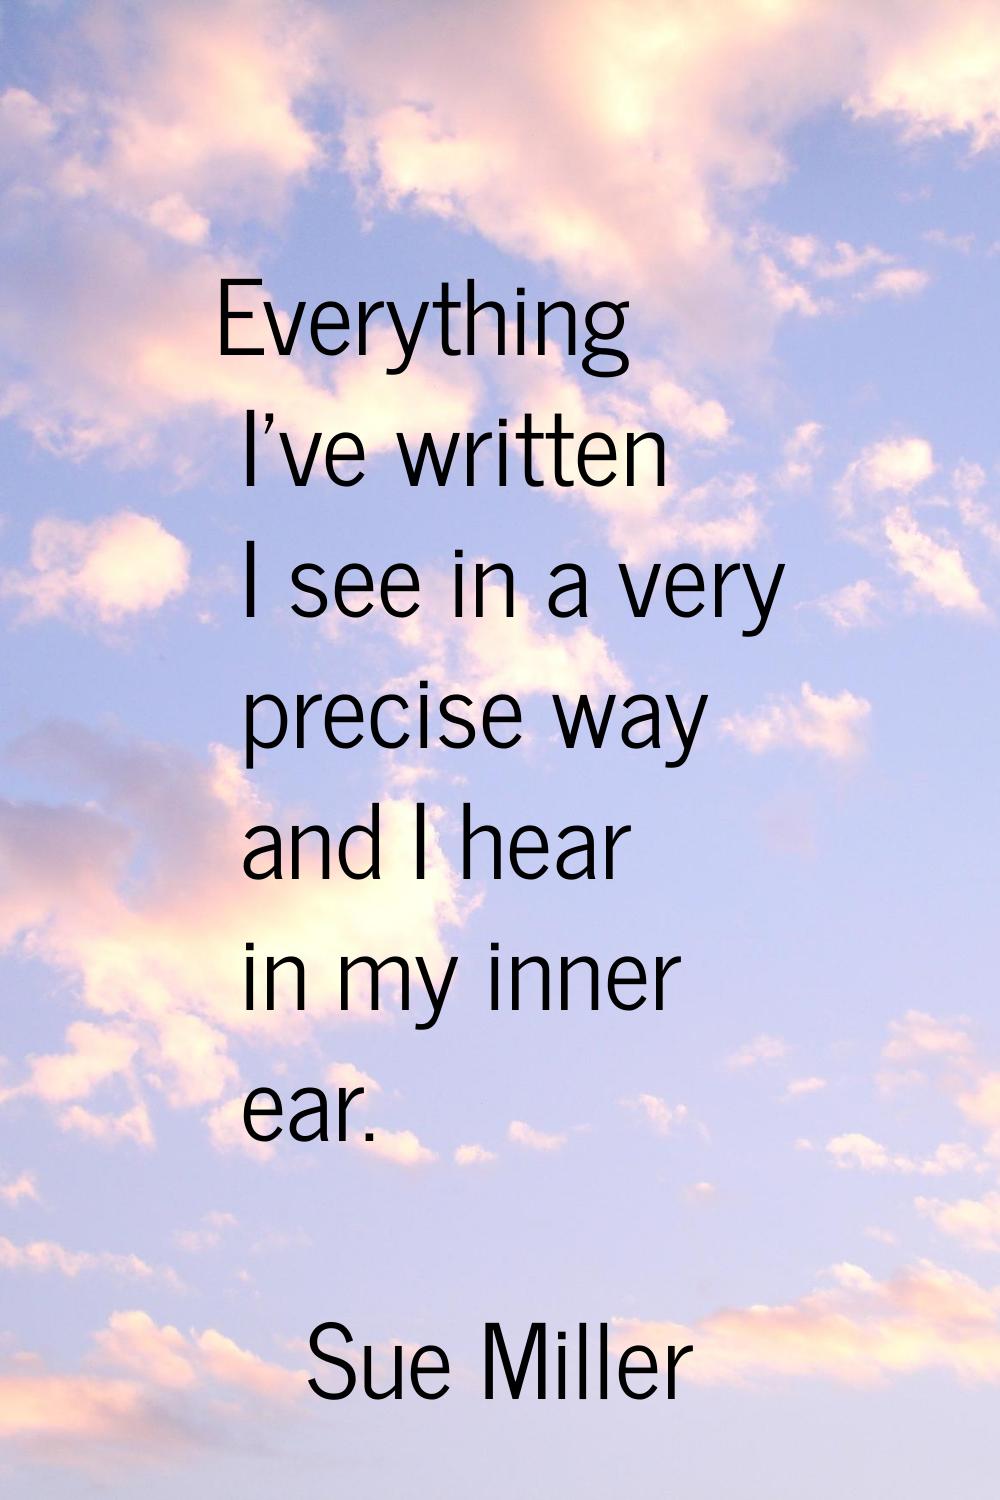 Everything I've written I see in a very precise way and I hear in my inner ear.